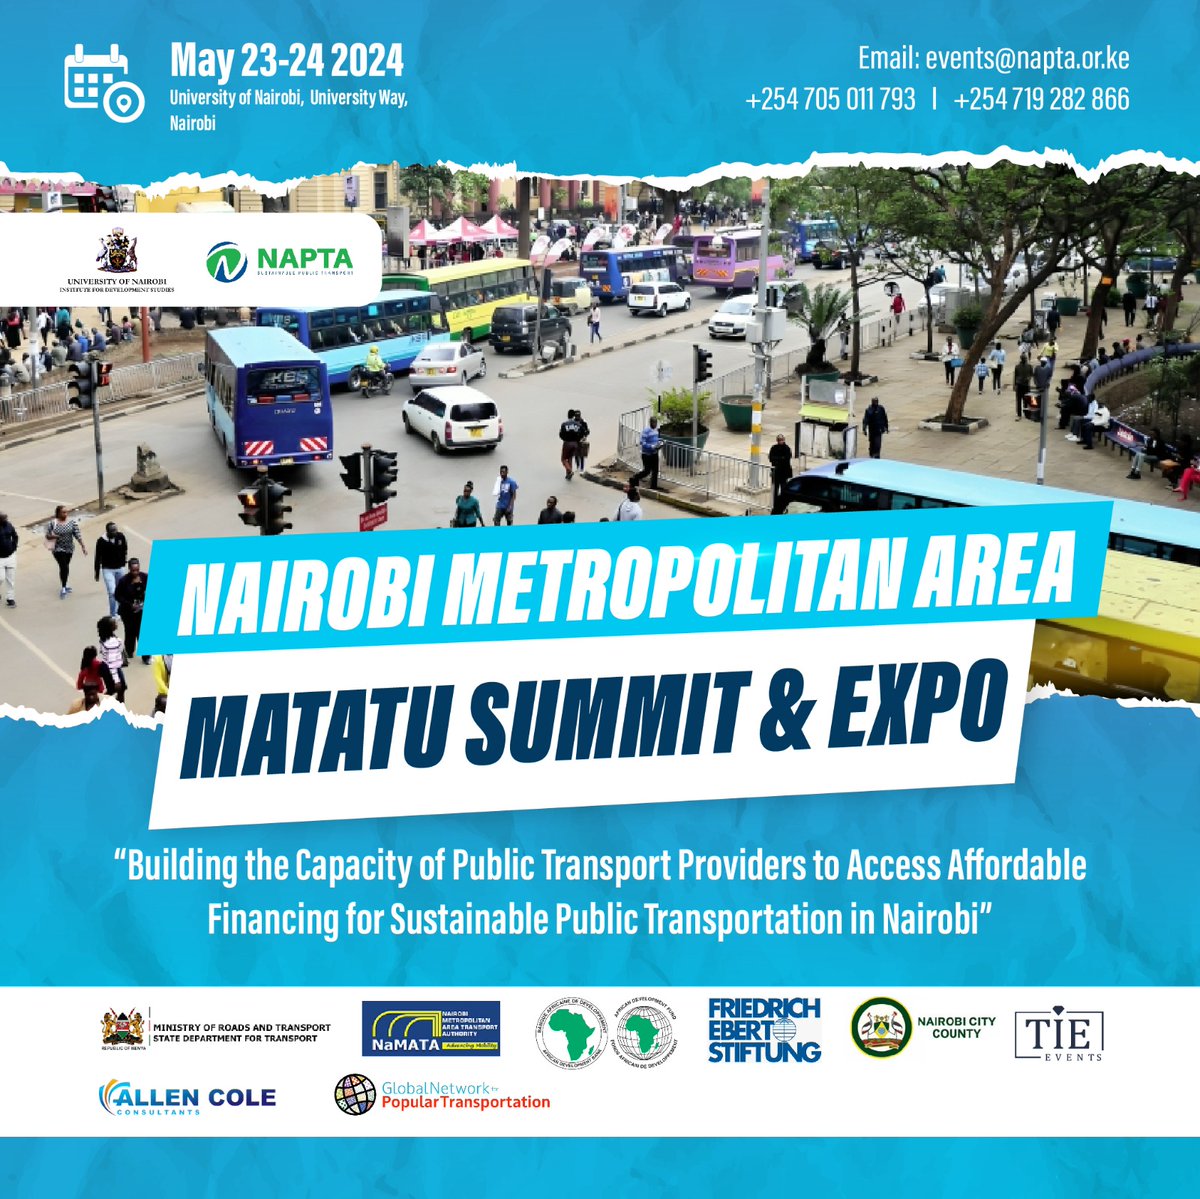 Ready to be part of the Nairobi Metropolitan Area Matatu Summit? Secure your spot now and join the conversation shaping the future of transportation in the region @uonbi 
Don't miss out, register today! docs.google.com/forms/d/e/1FAI…
#MatatuSummit #NairobiTransport #WeareUoN